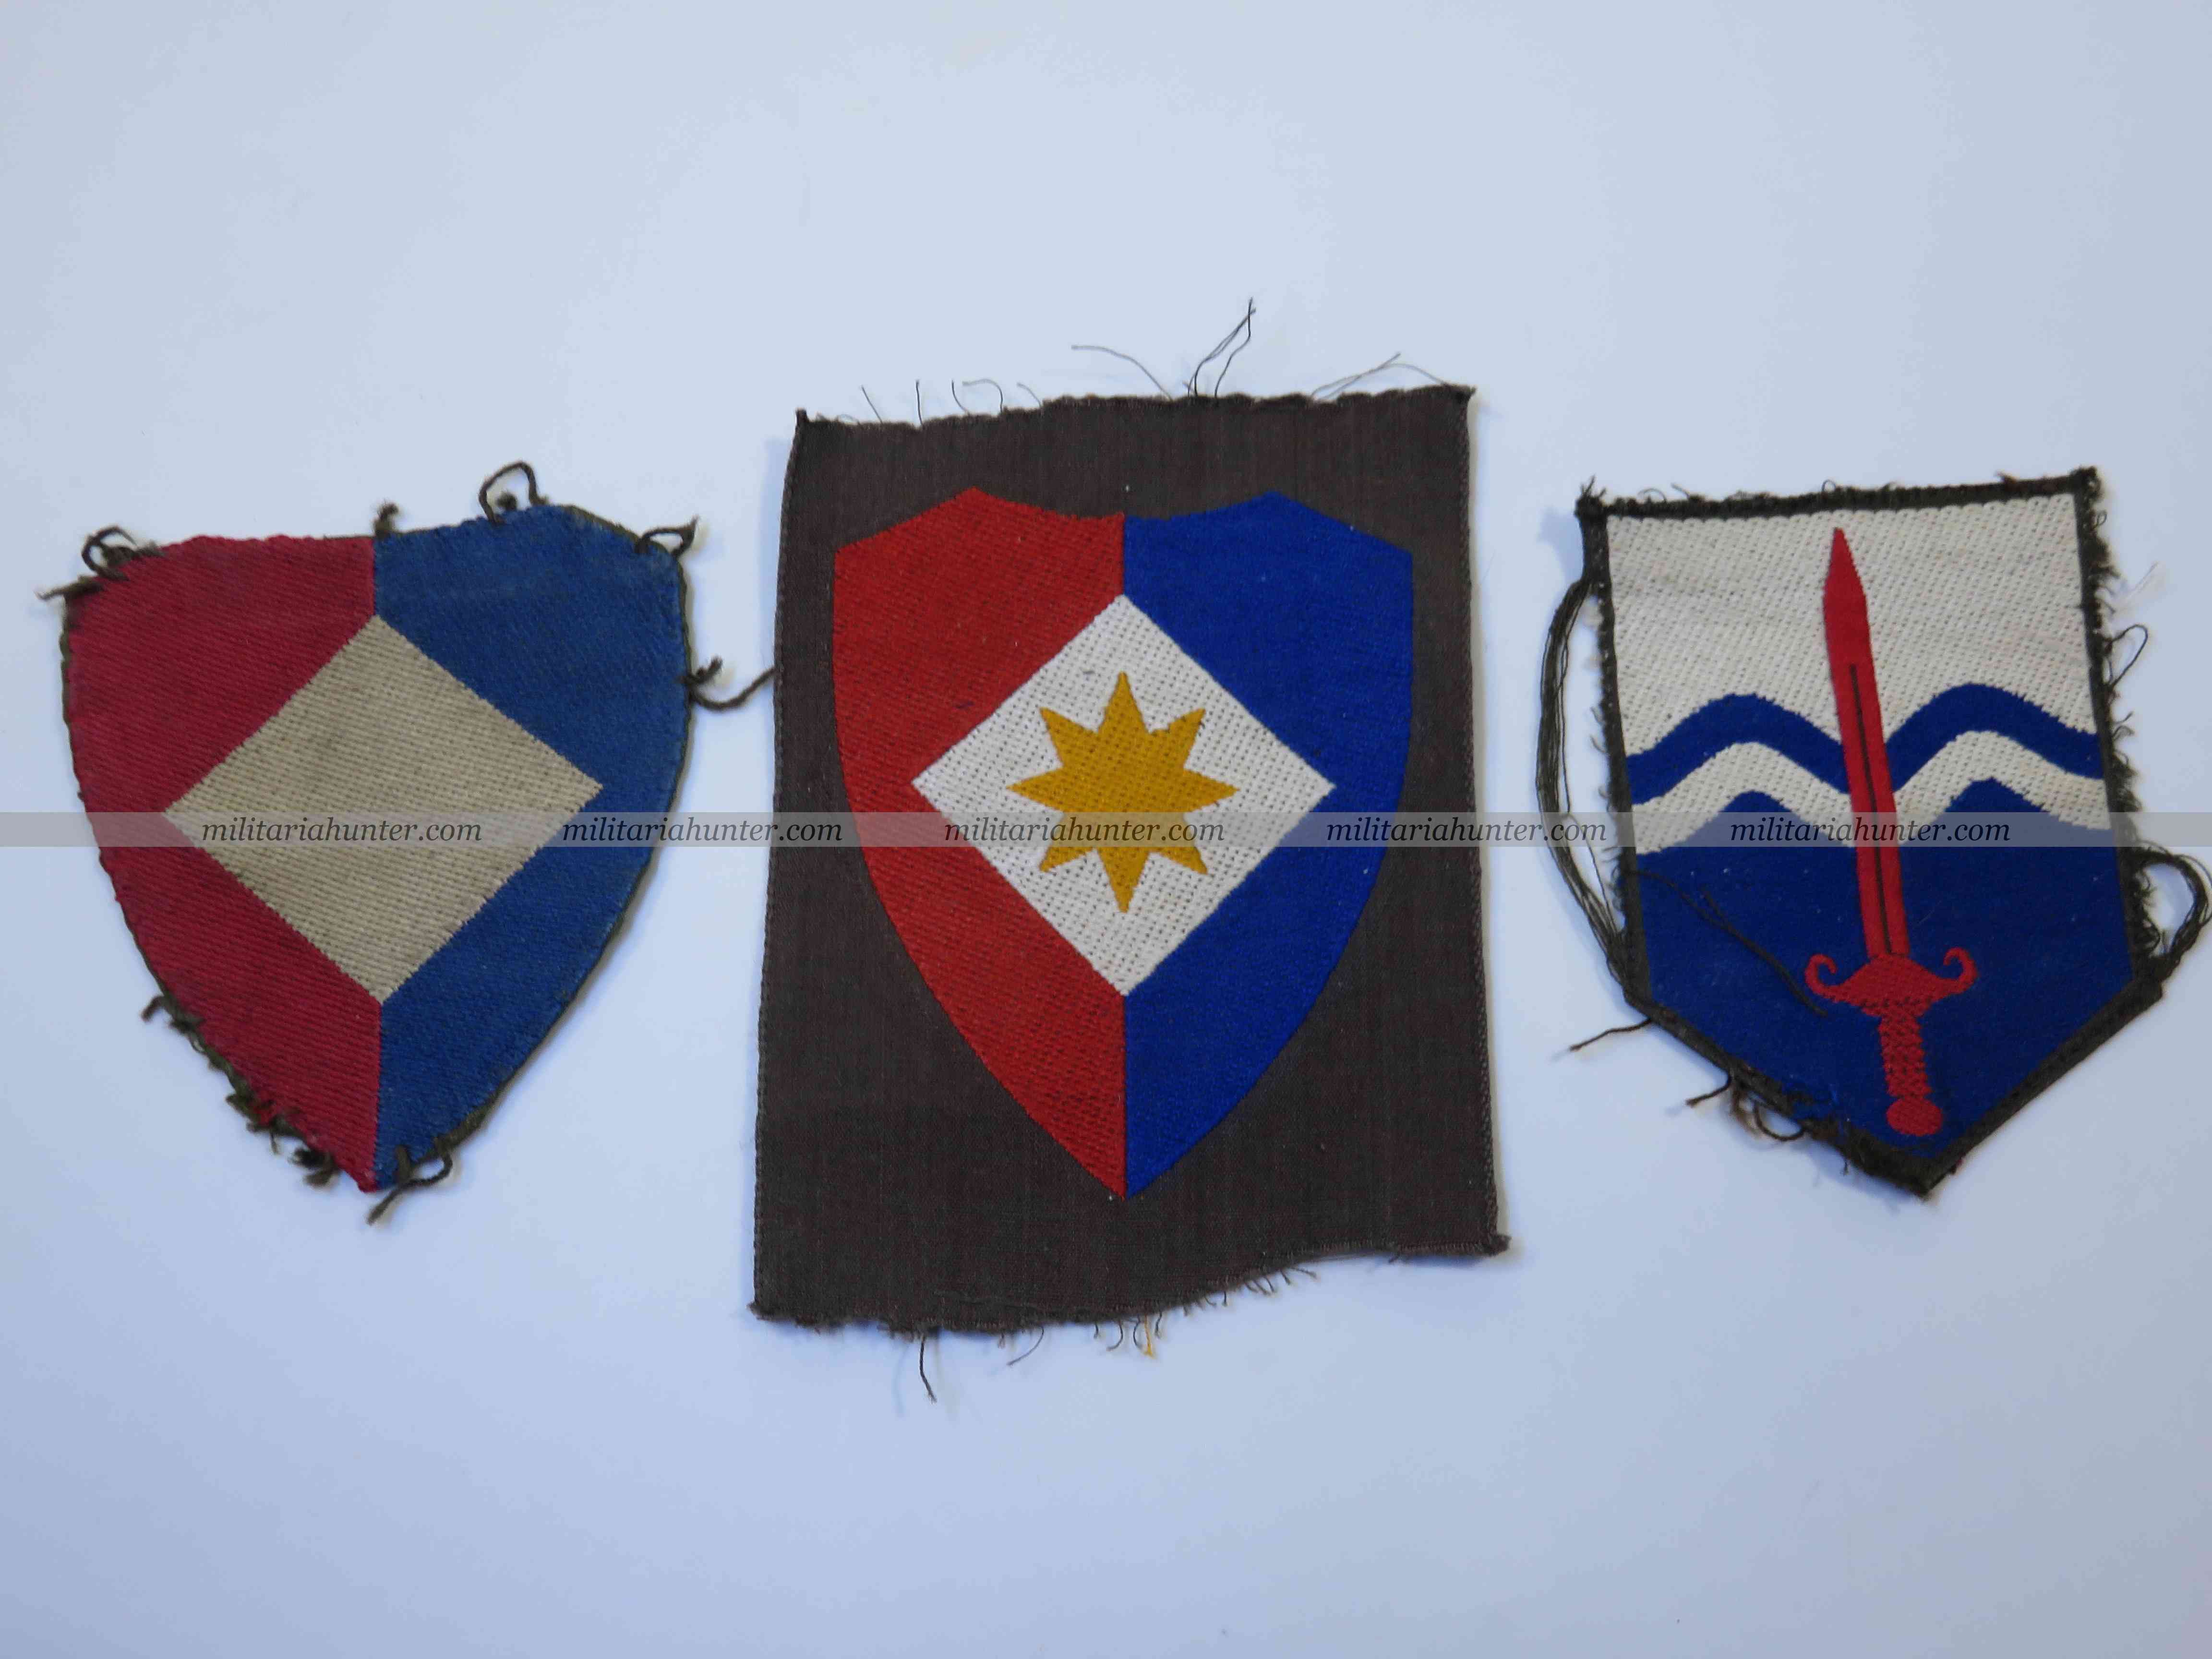 militaria : Netherlands army patches - Nederlandse leger patches